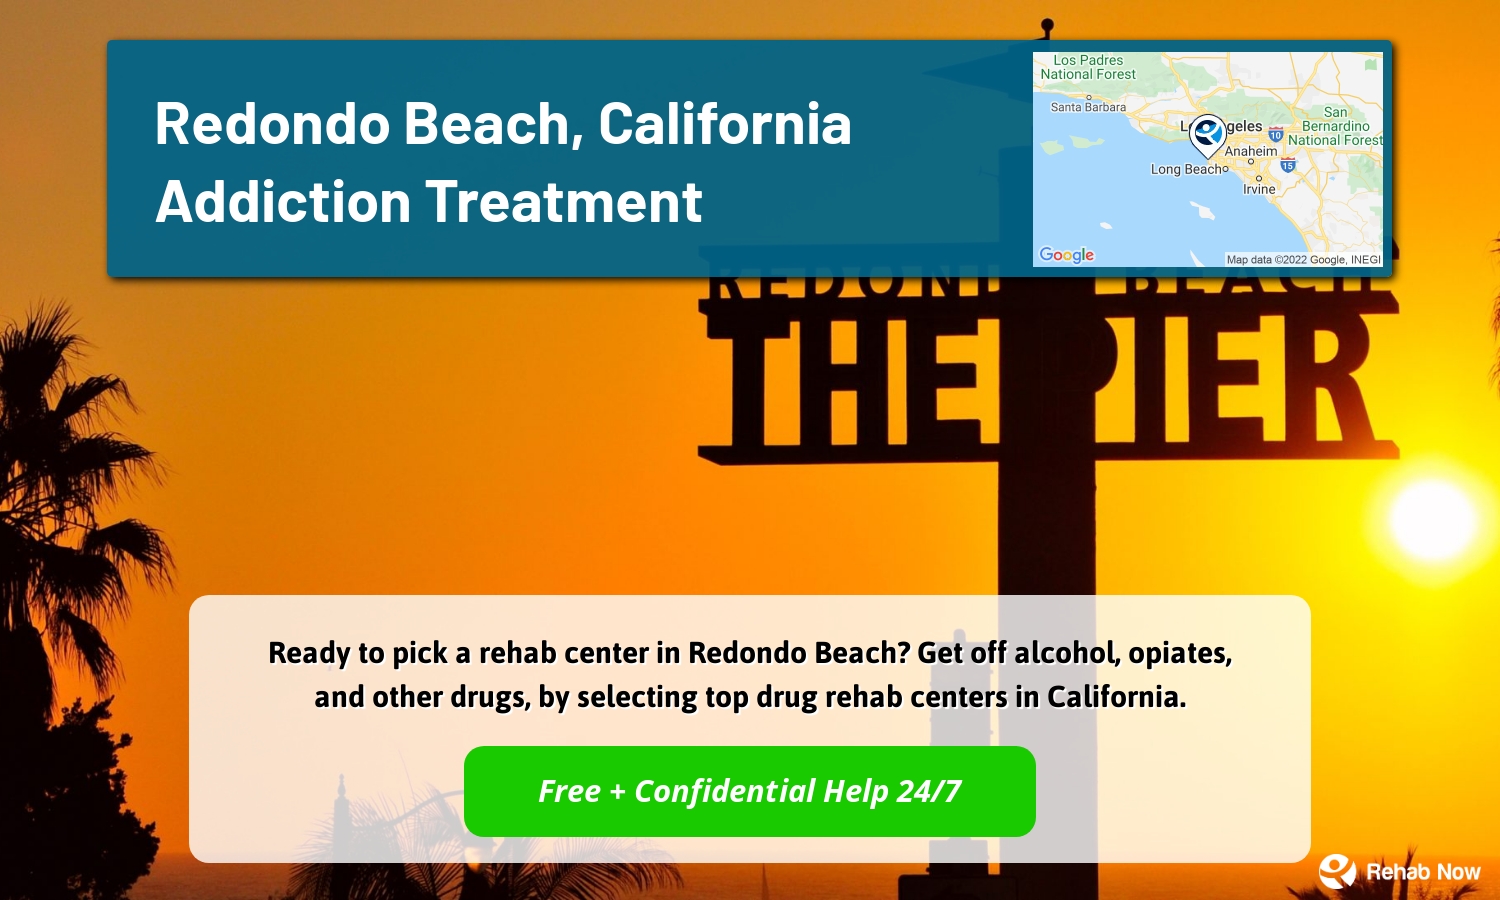 Ready to pick a rehab center in Redondo Beach? Get off alcohol, opiates, and other drugs, by selecting top drug rehab centers in California.